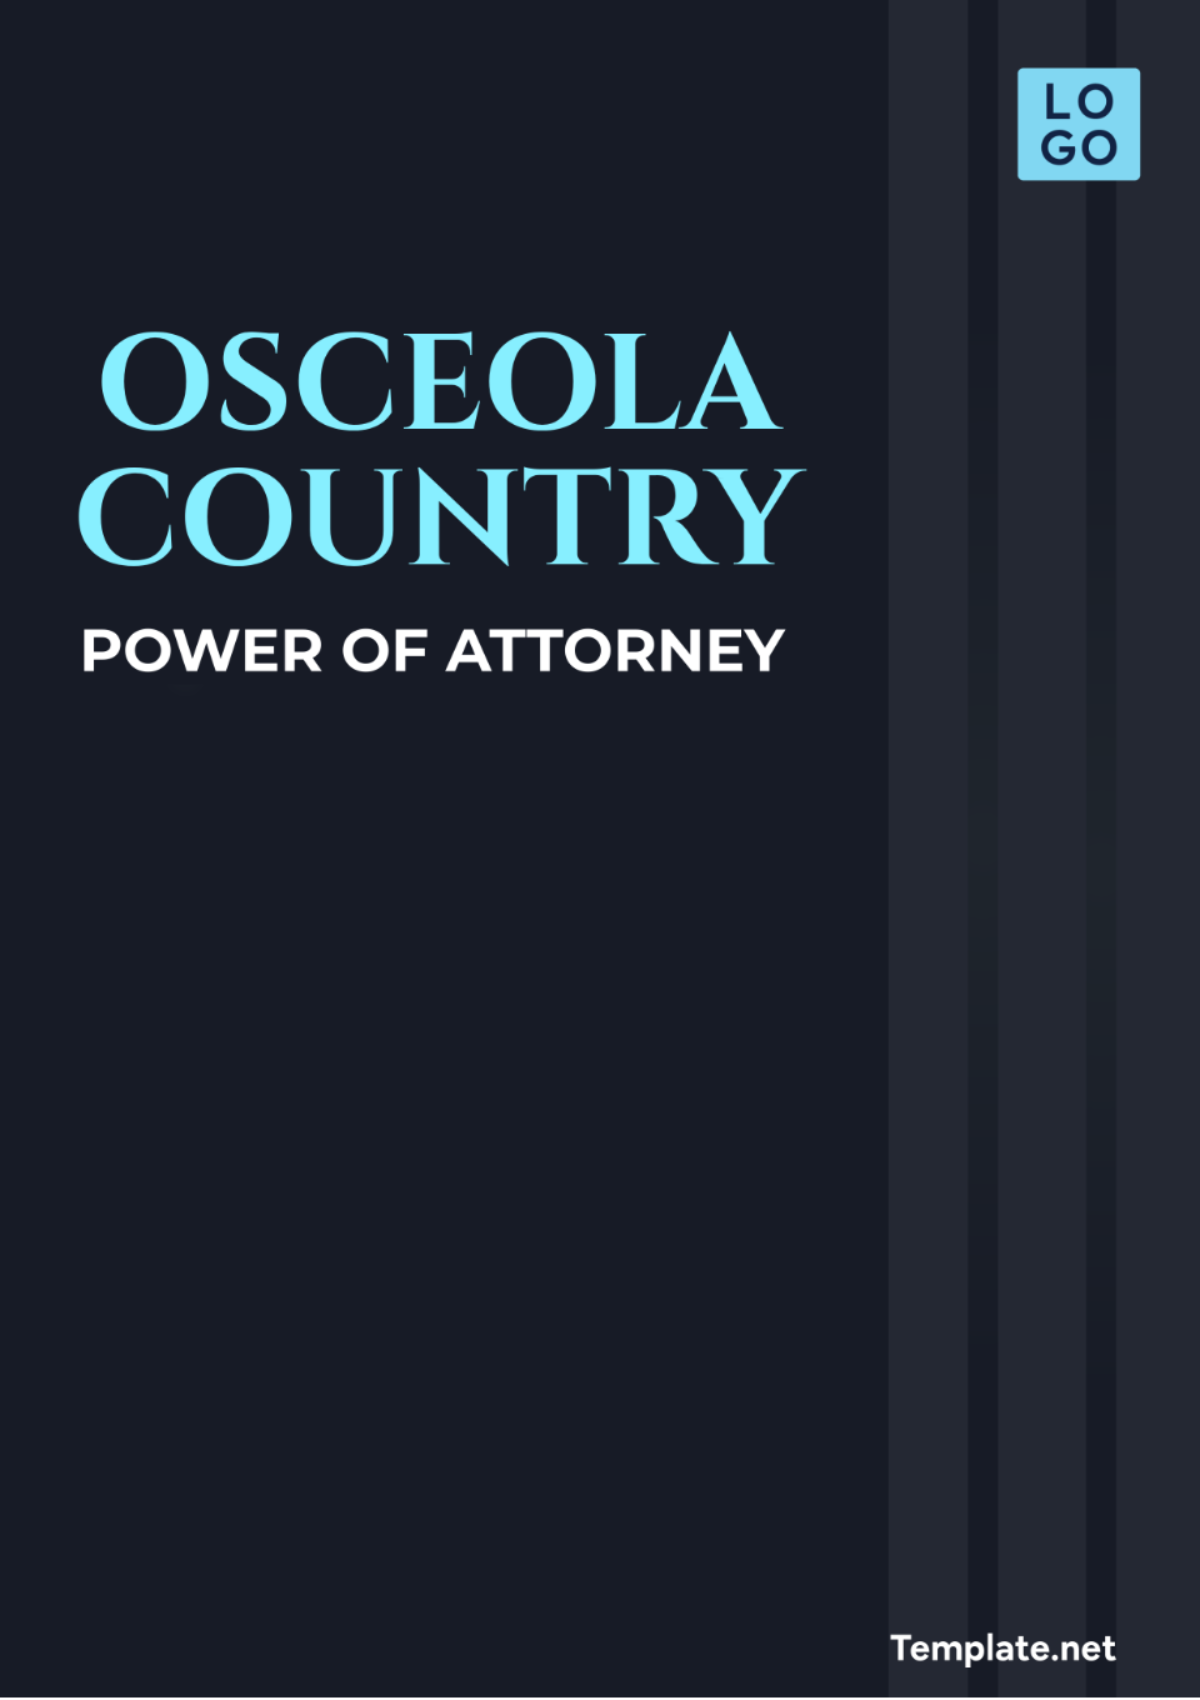 Free Osceola County Power of Attorney Template